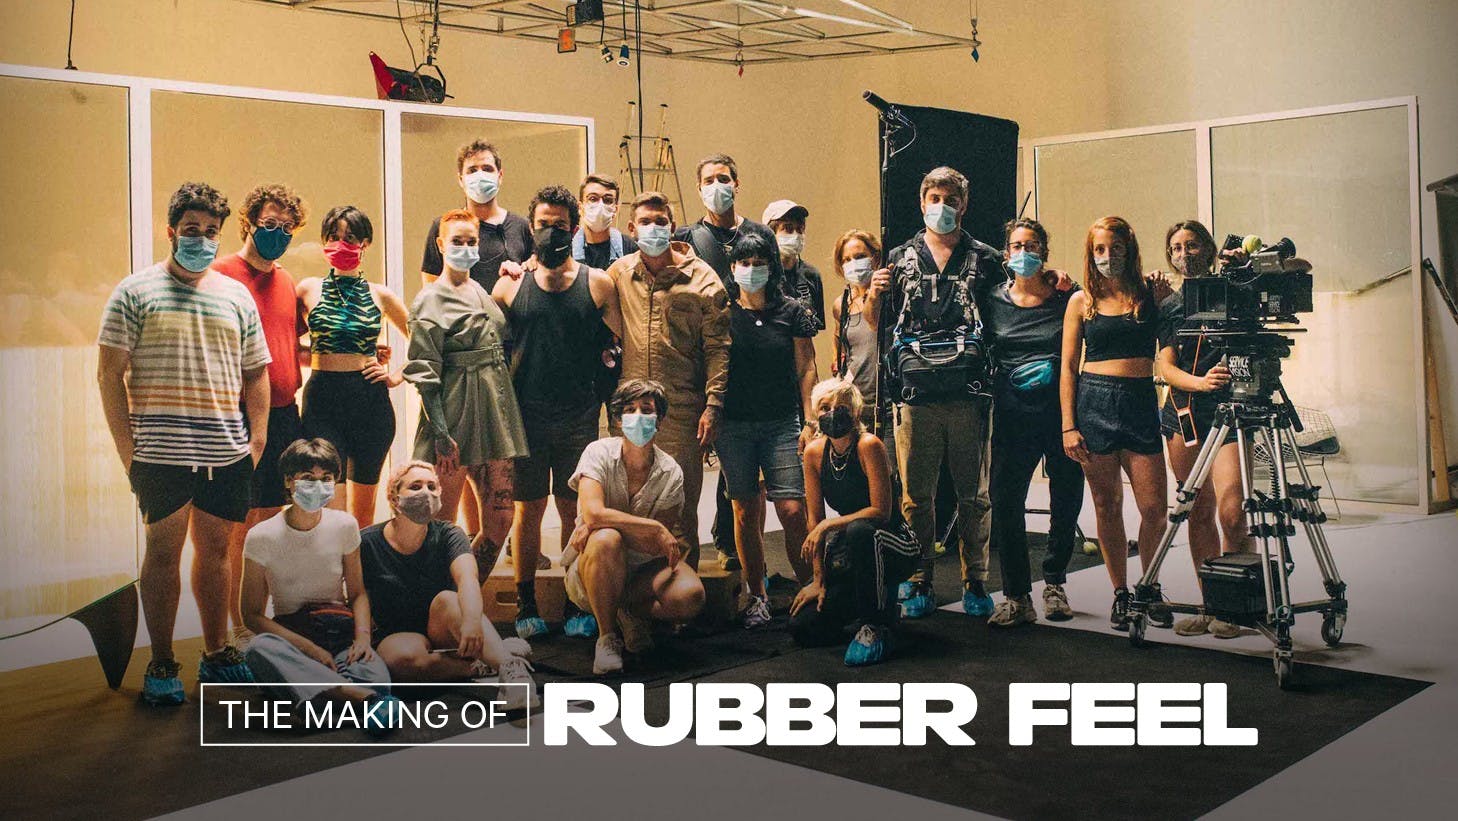 Behind The Scenes: Rubber Feel